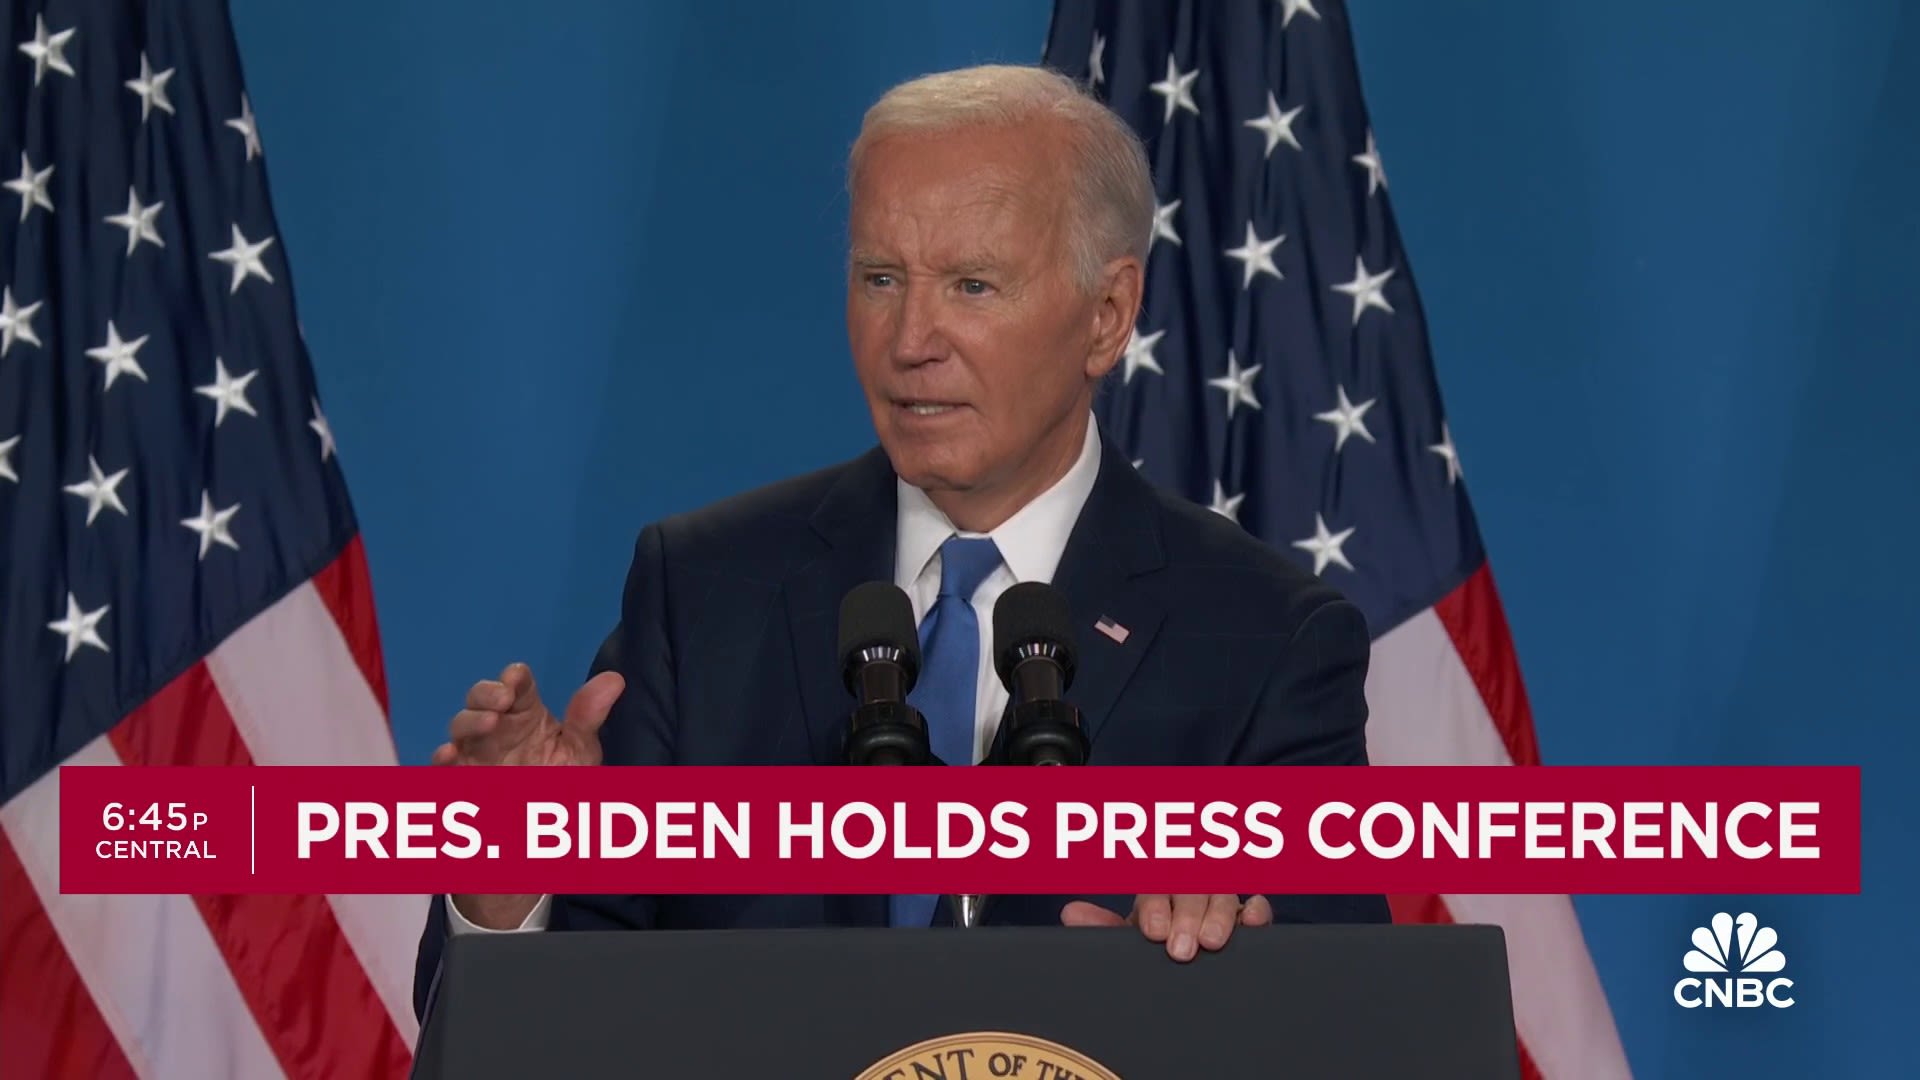 Pres. Biden: Vice President Harris is qualified to be president, 'that's why I picked her'